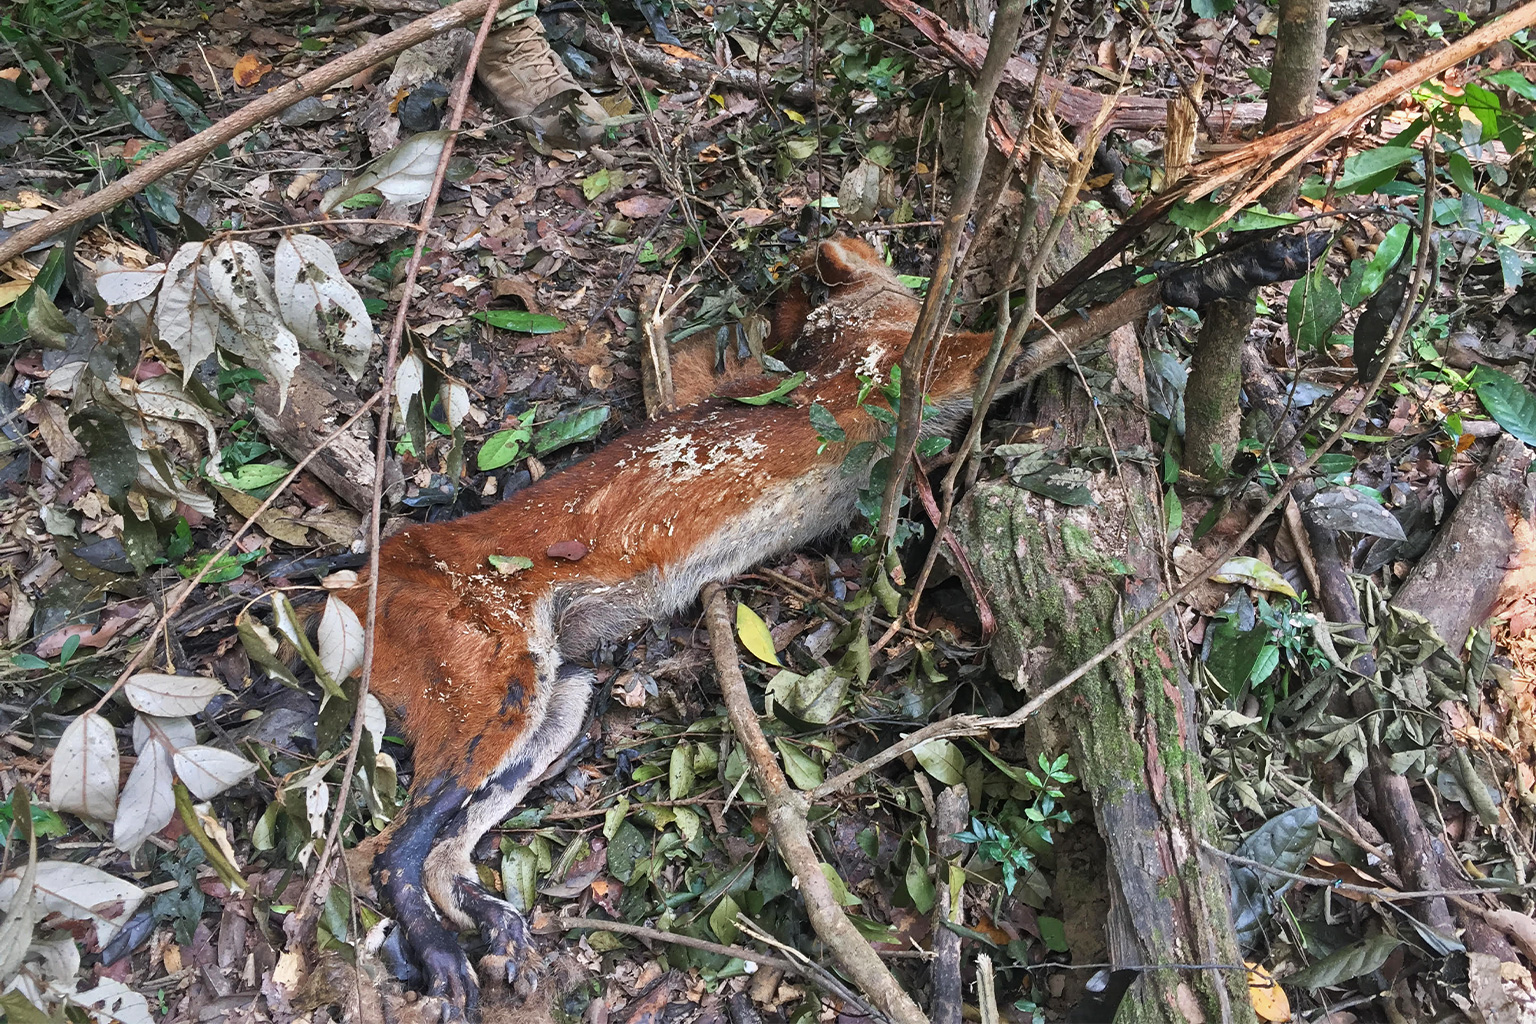 A dhole caught in a snare